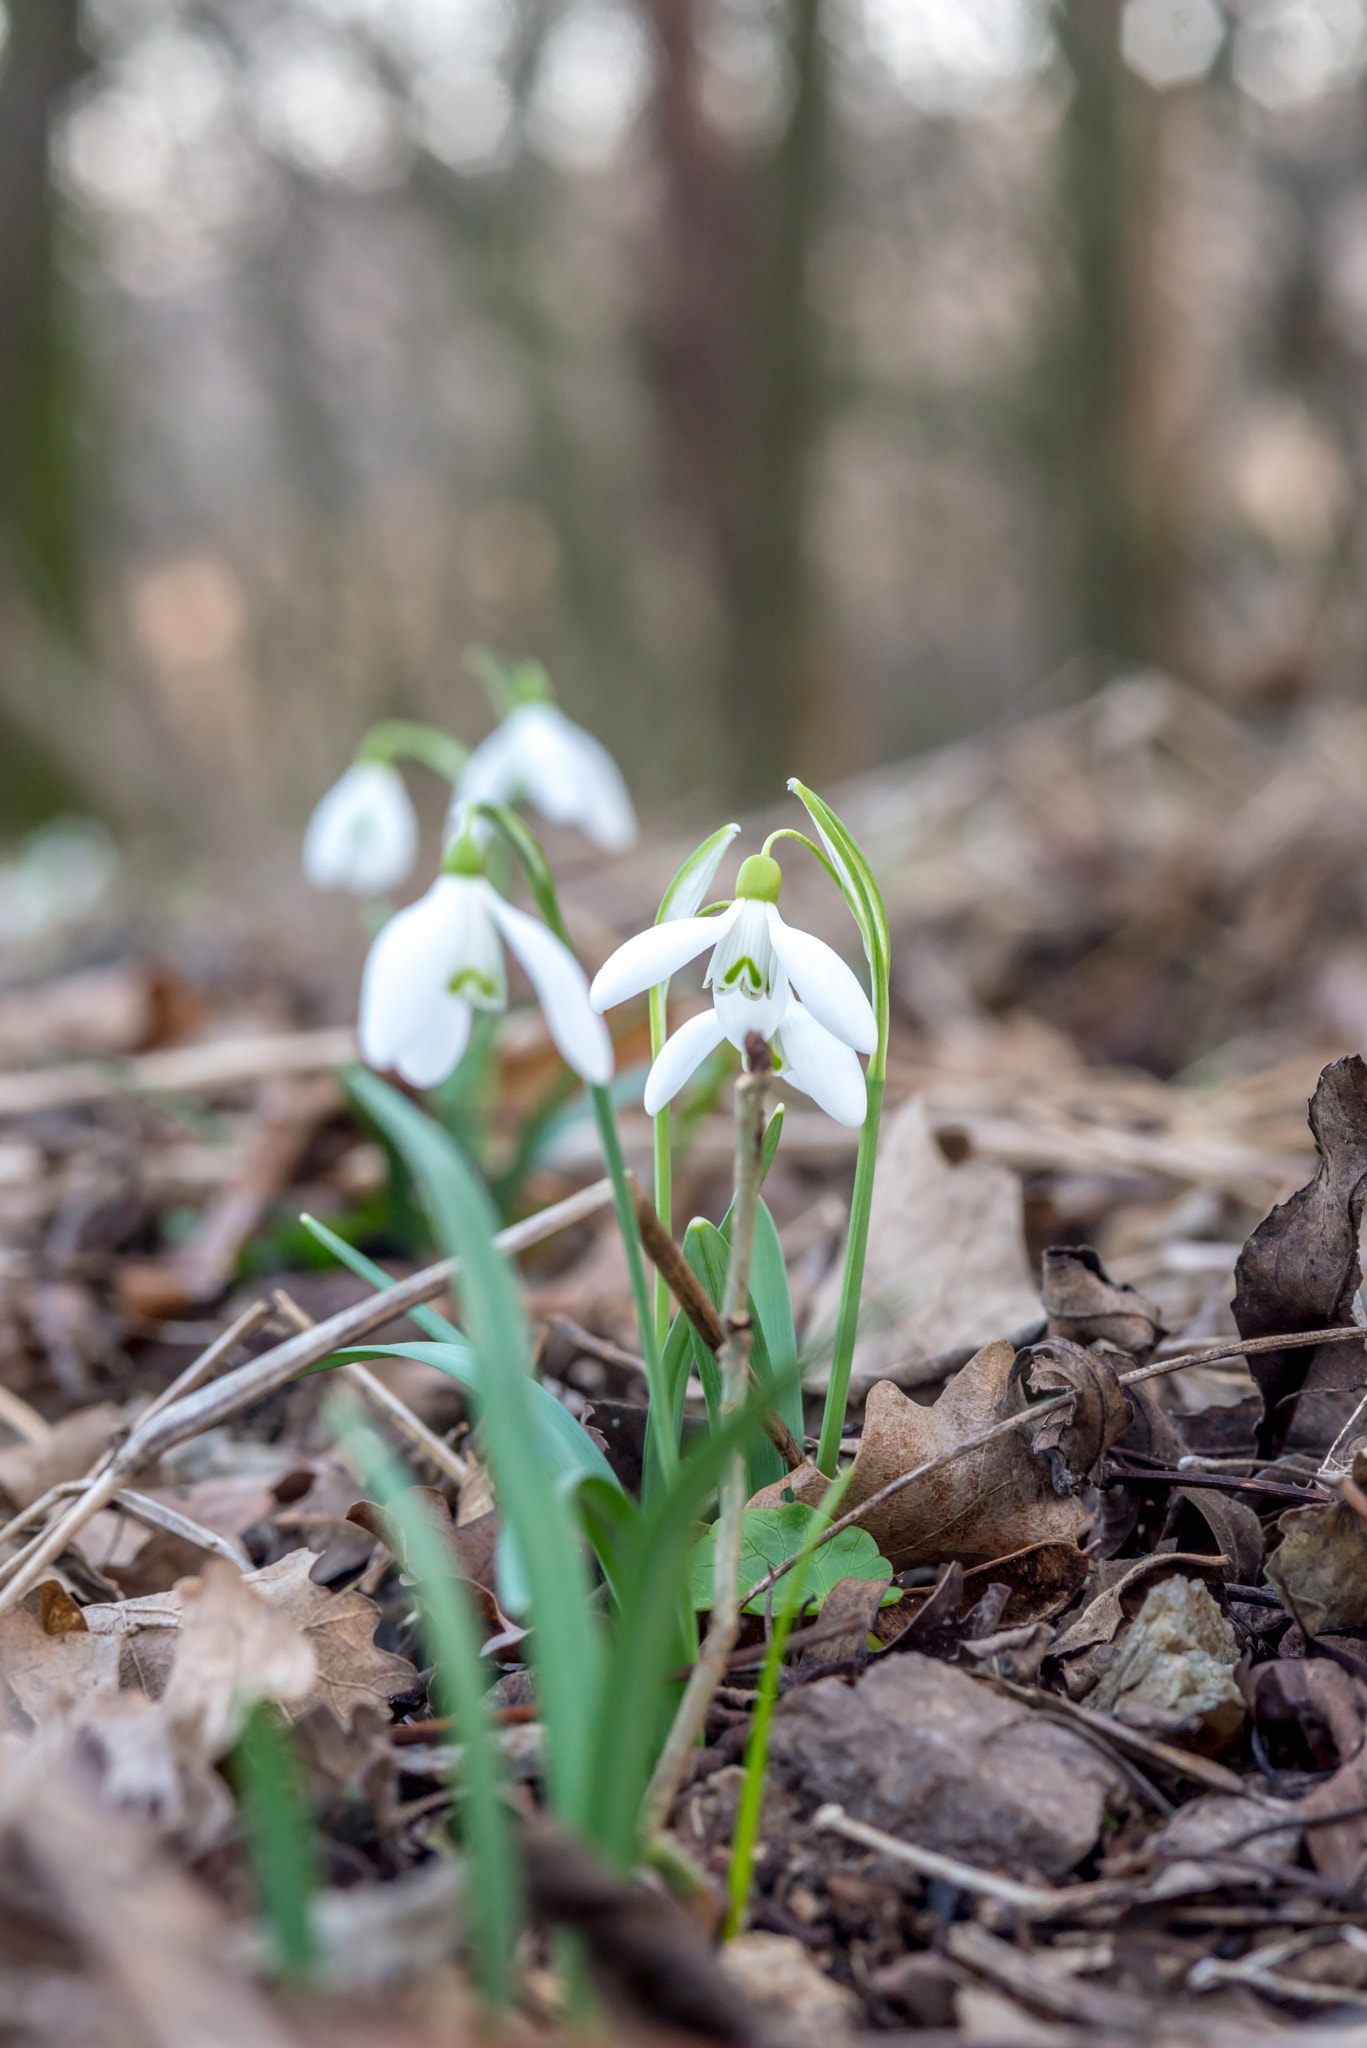 AF Micro-Nikkor 105mm f/2.8 sample photo. Early snowdrops in forest early spring, march photography